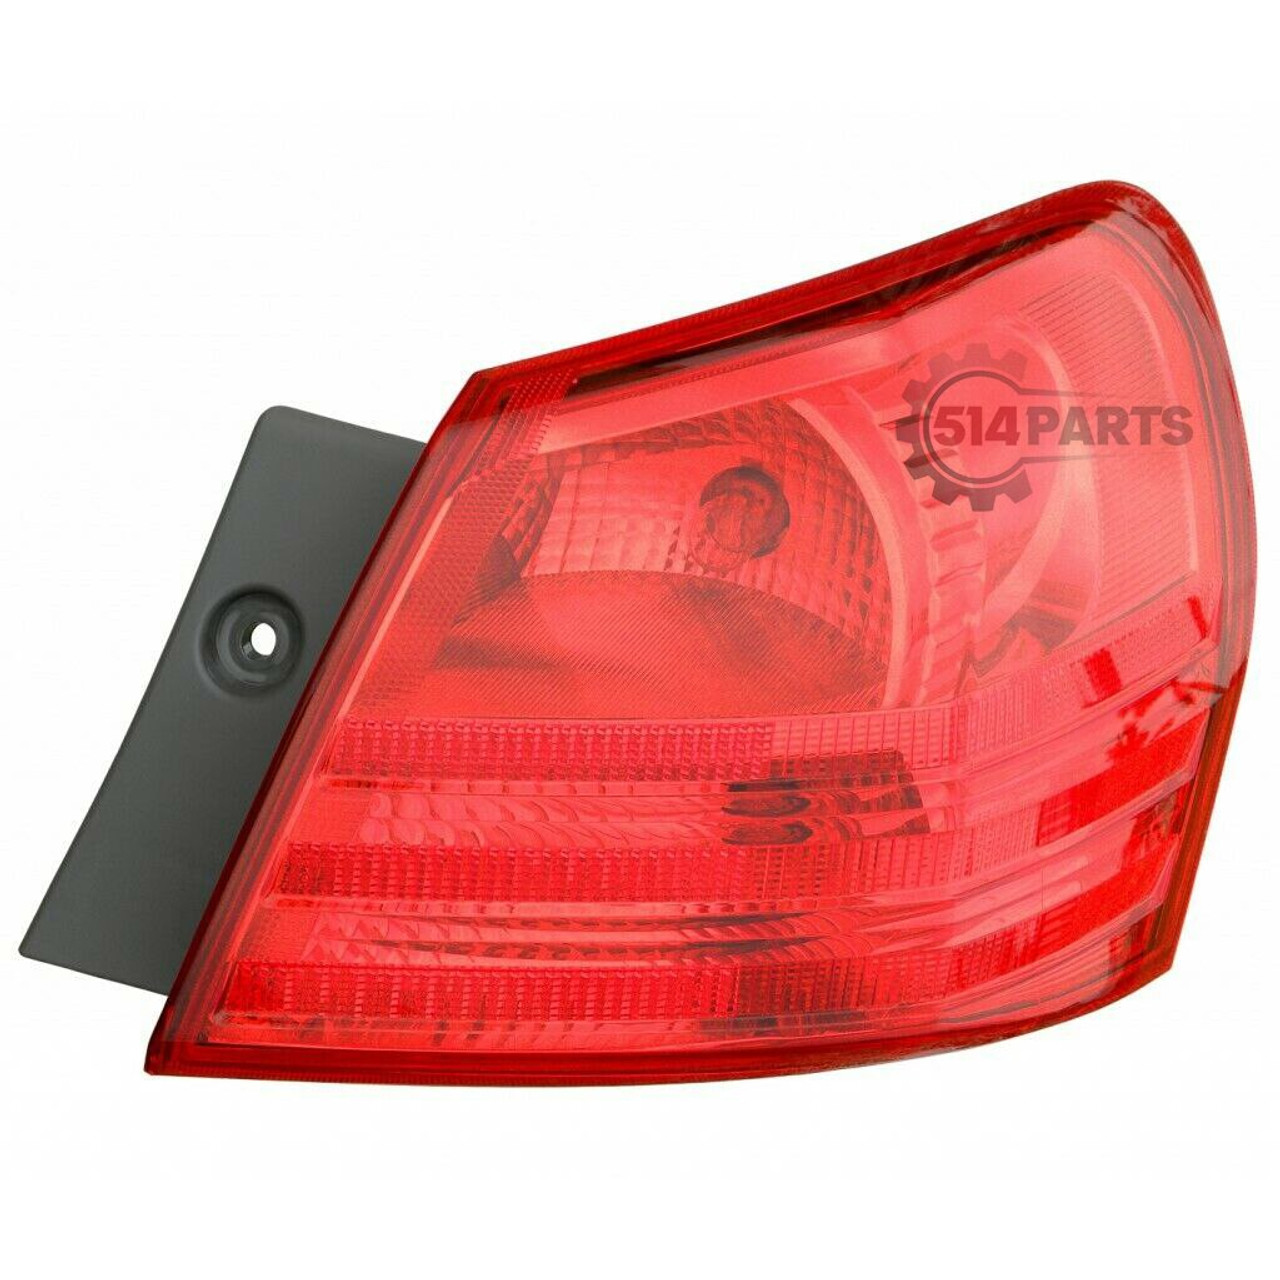 2008 - 2013 NISSAN ROGUE TAIL LIGHTS - PHARES ARRIERE